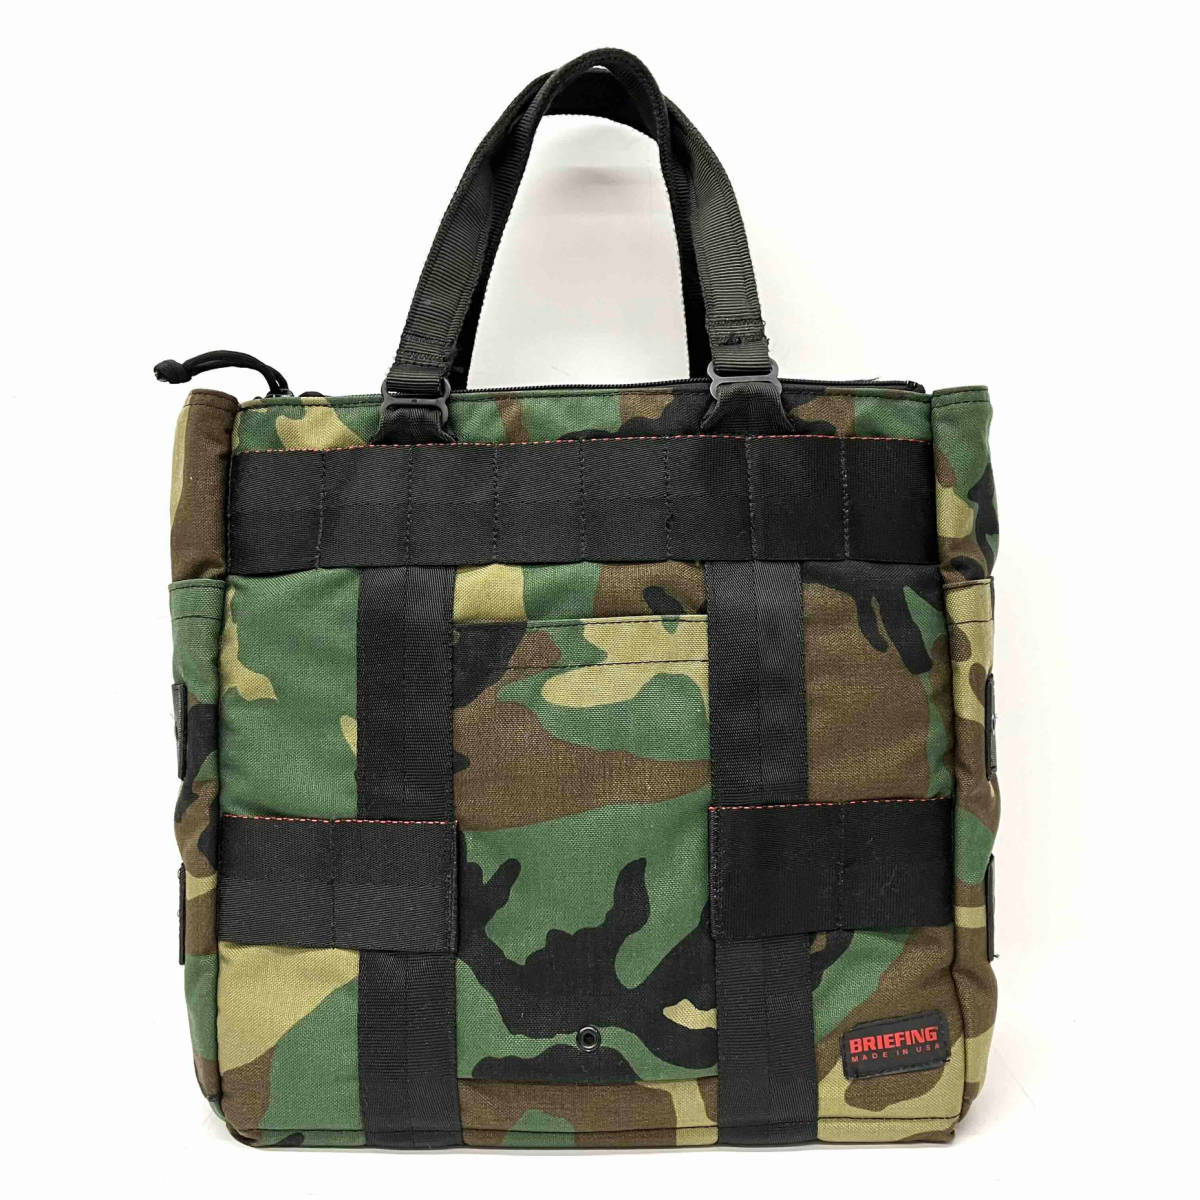 BRIEFING ブリーフィング PROTECTION TOTE プロテクション トート バッグ 迷彩 カモフラ 柄 MADE IN USA BRF006219